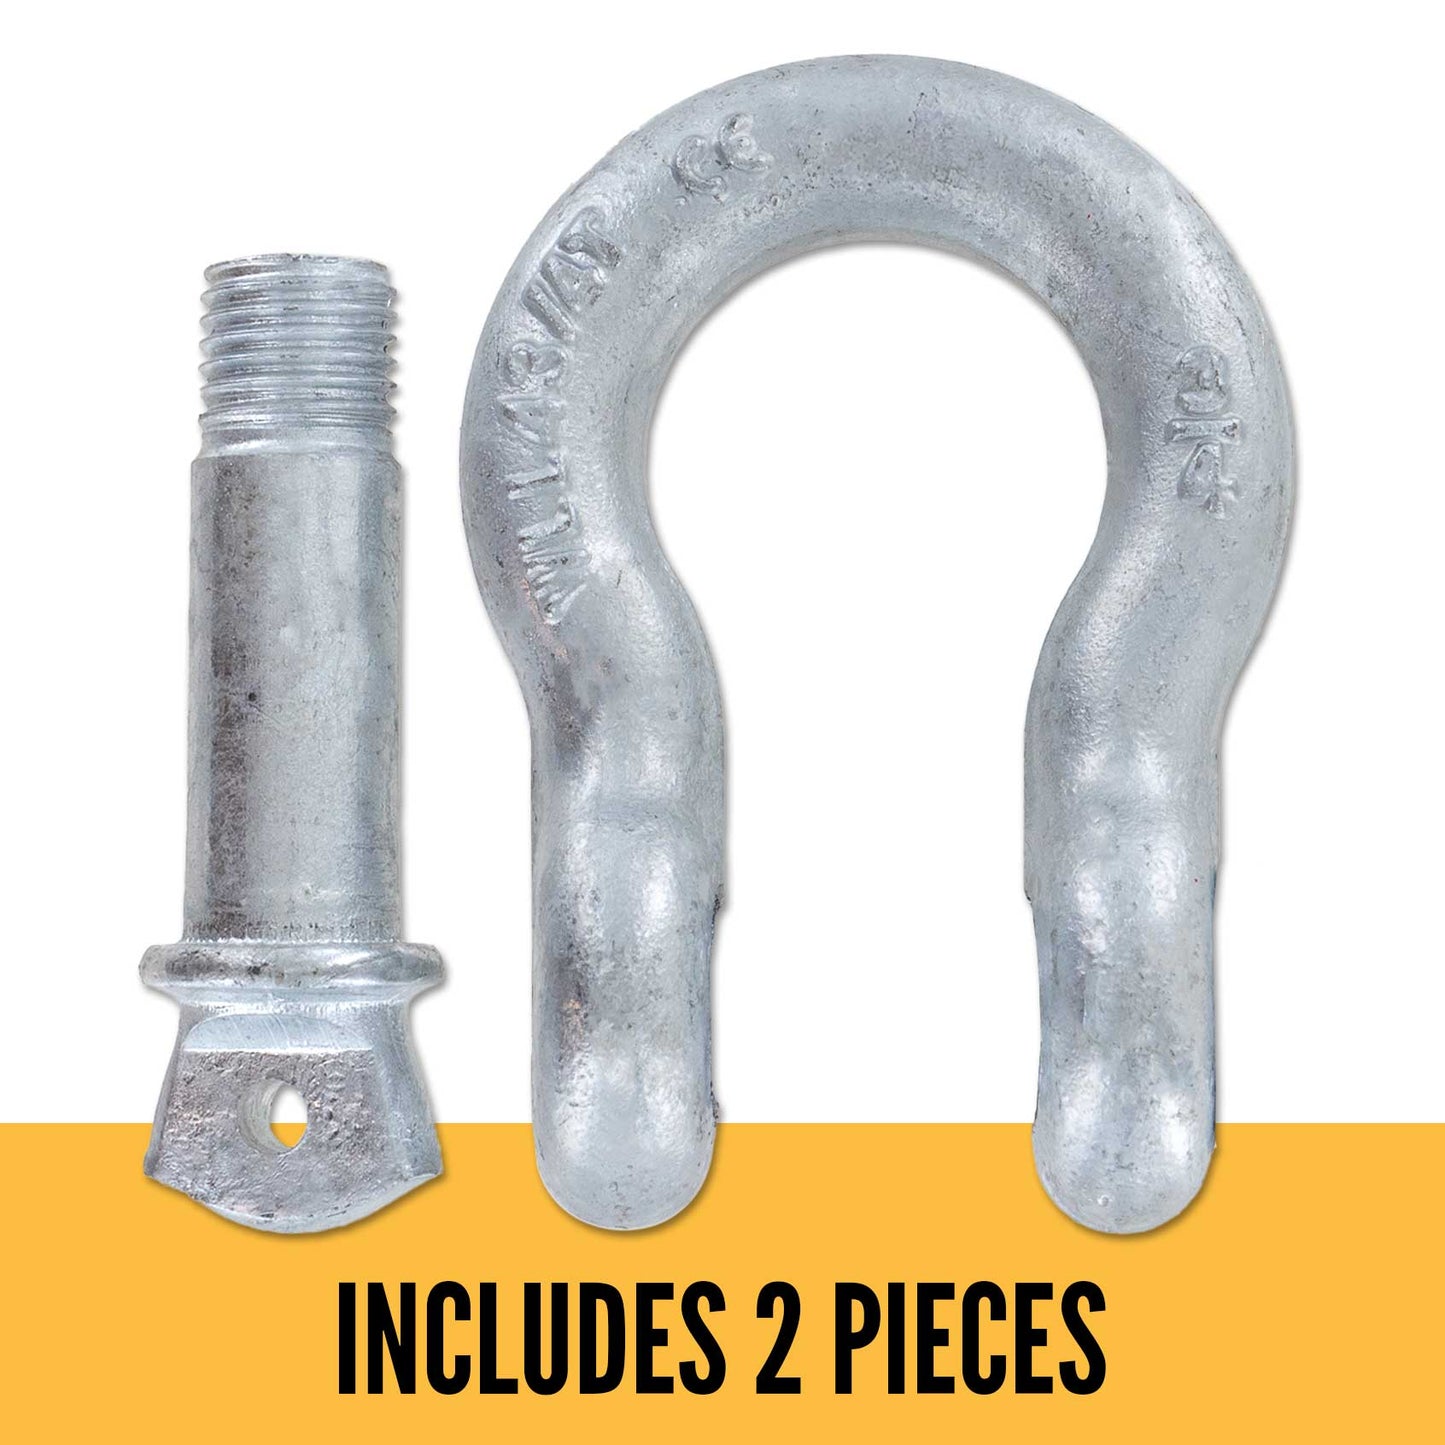 2-1/2" Galvanized Screw Pin Anchor Shackle - 55 Ton parts of a shackle